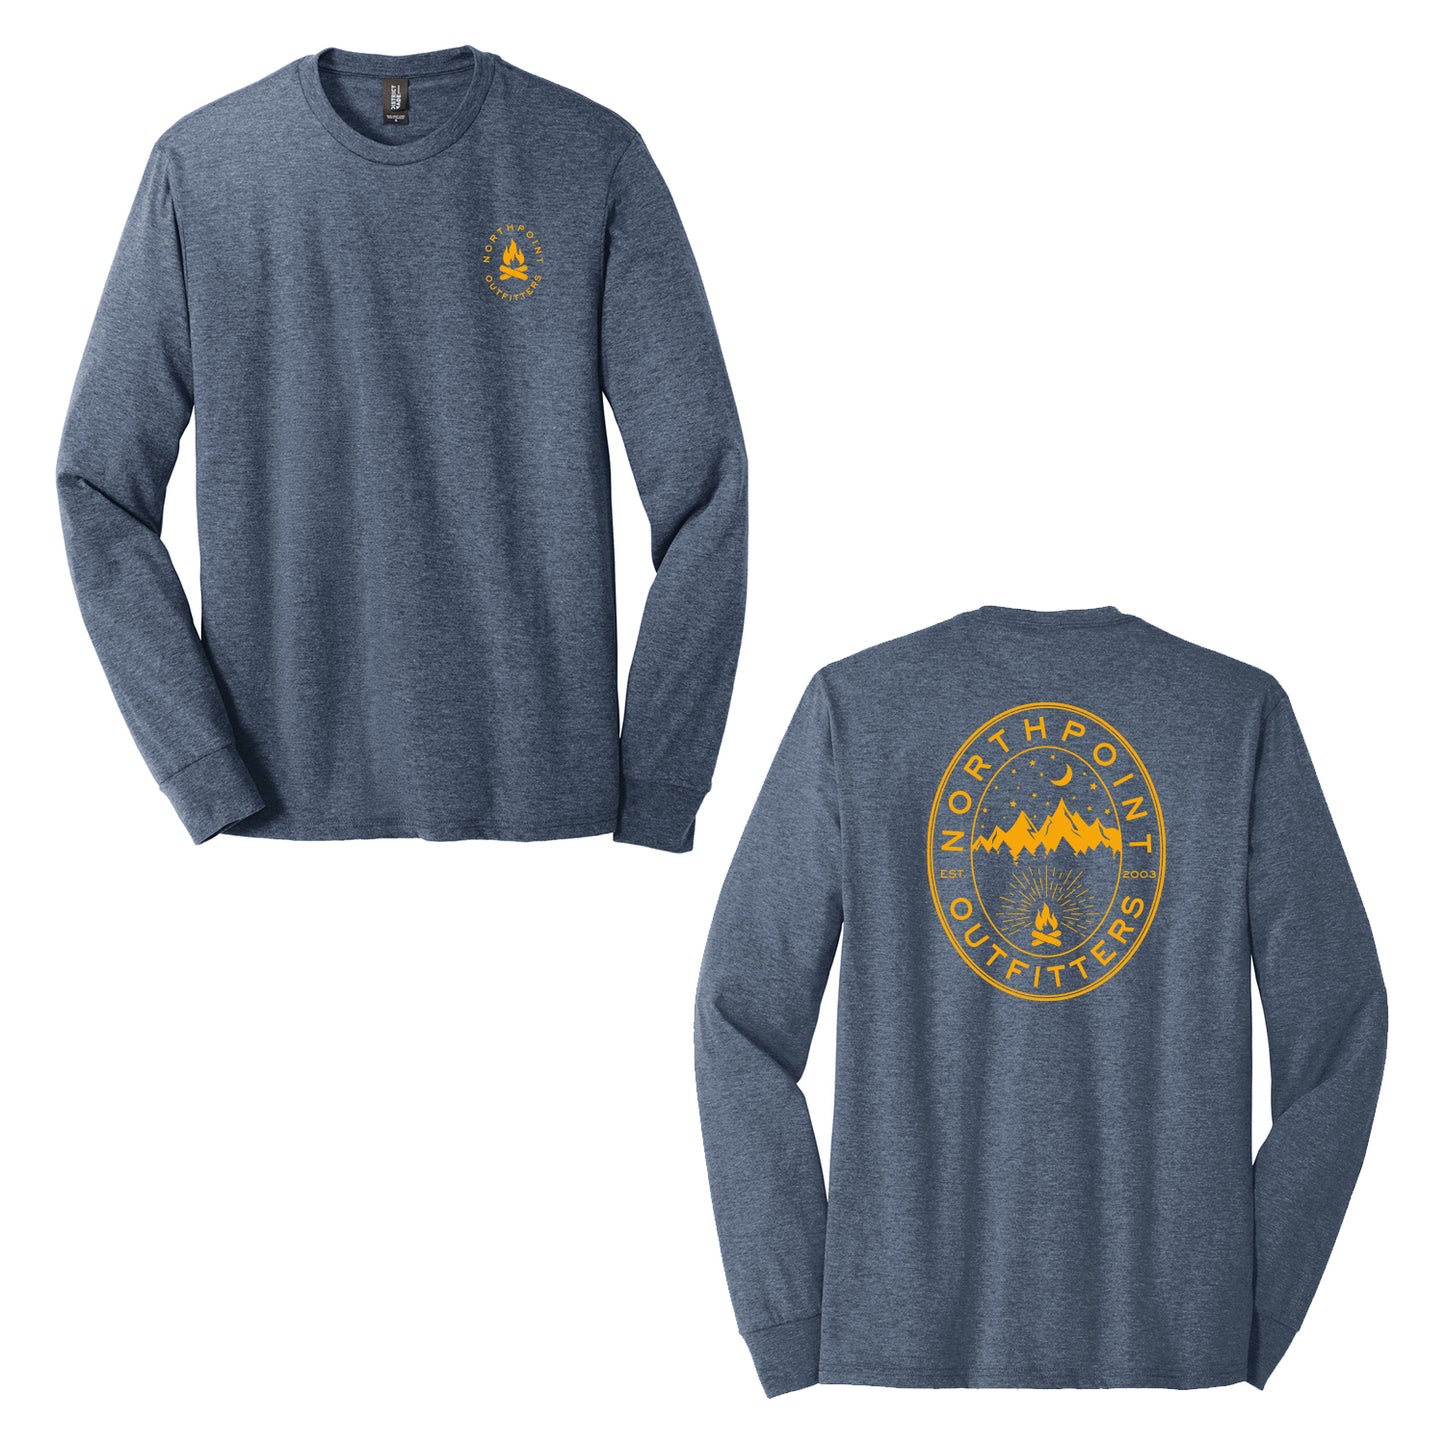 NorthPoint Outfitters Long Sleeve T-shirt - Navy